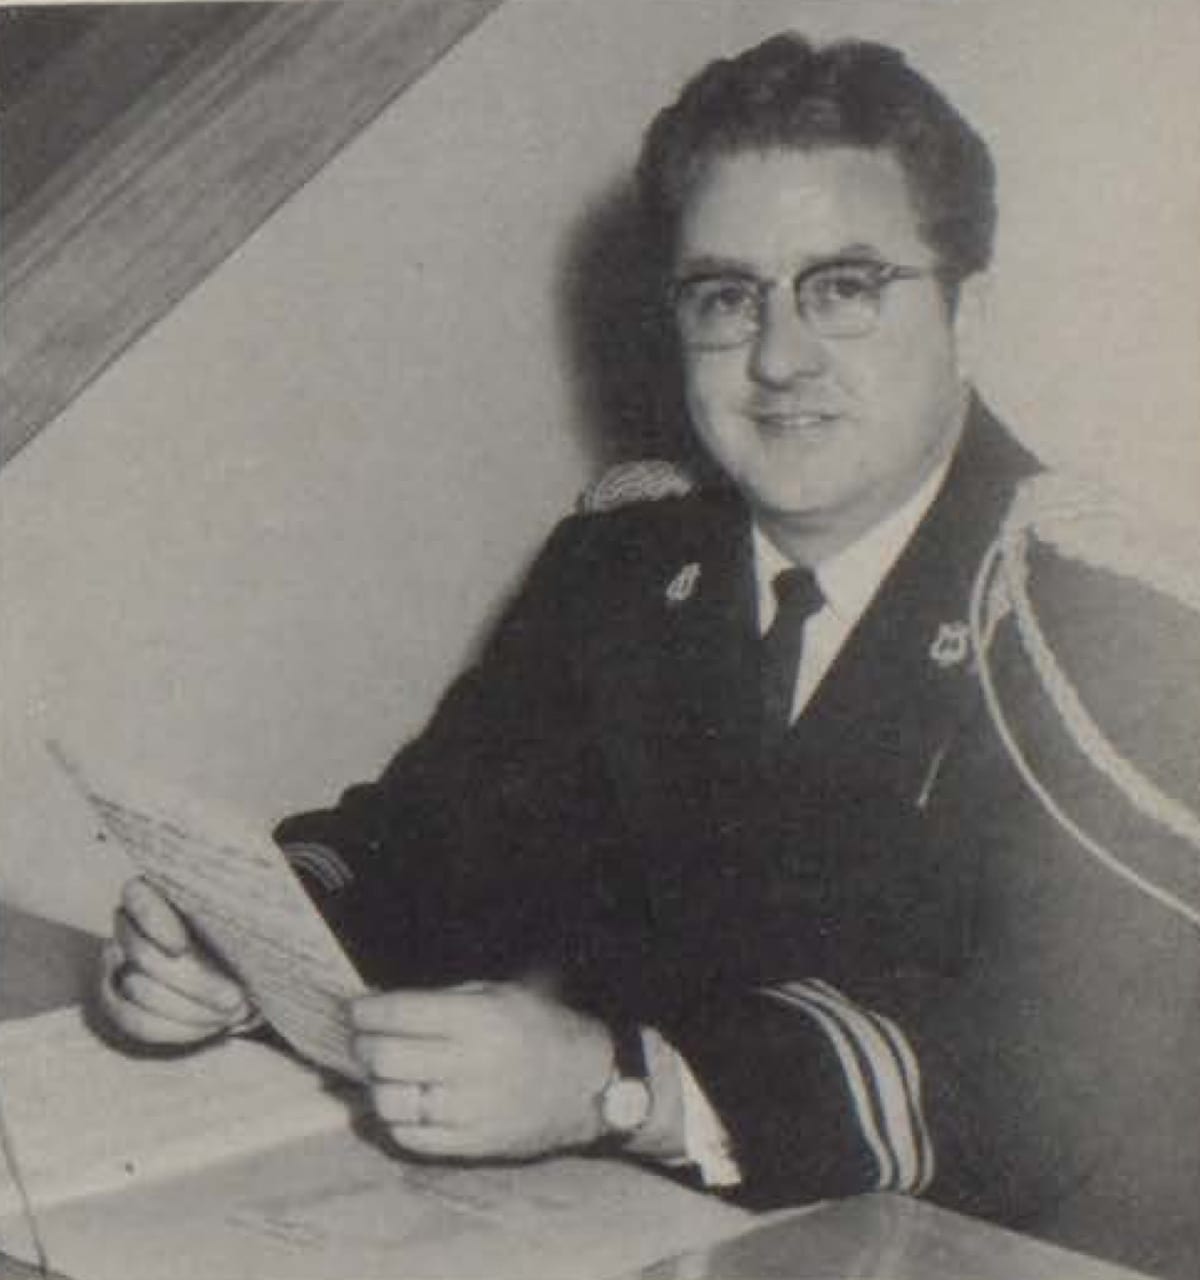 Dr. Ted Crager – director of bands, circa 1958